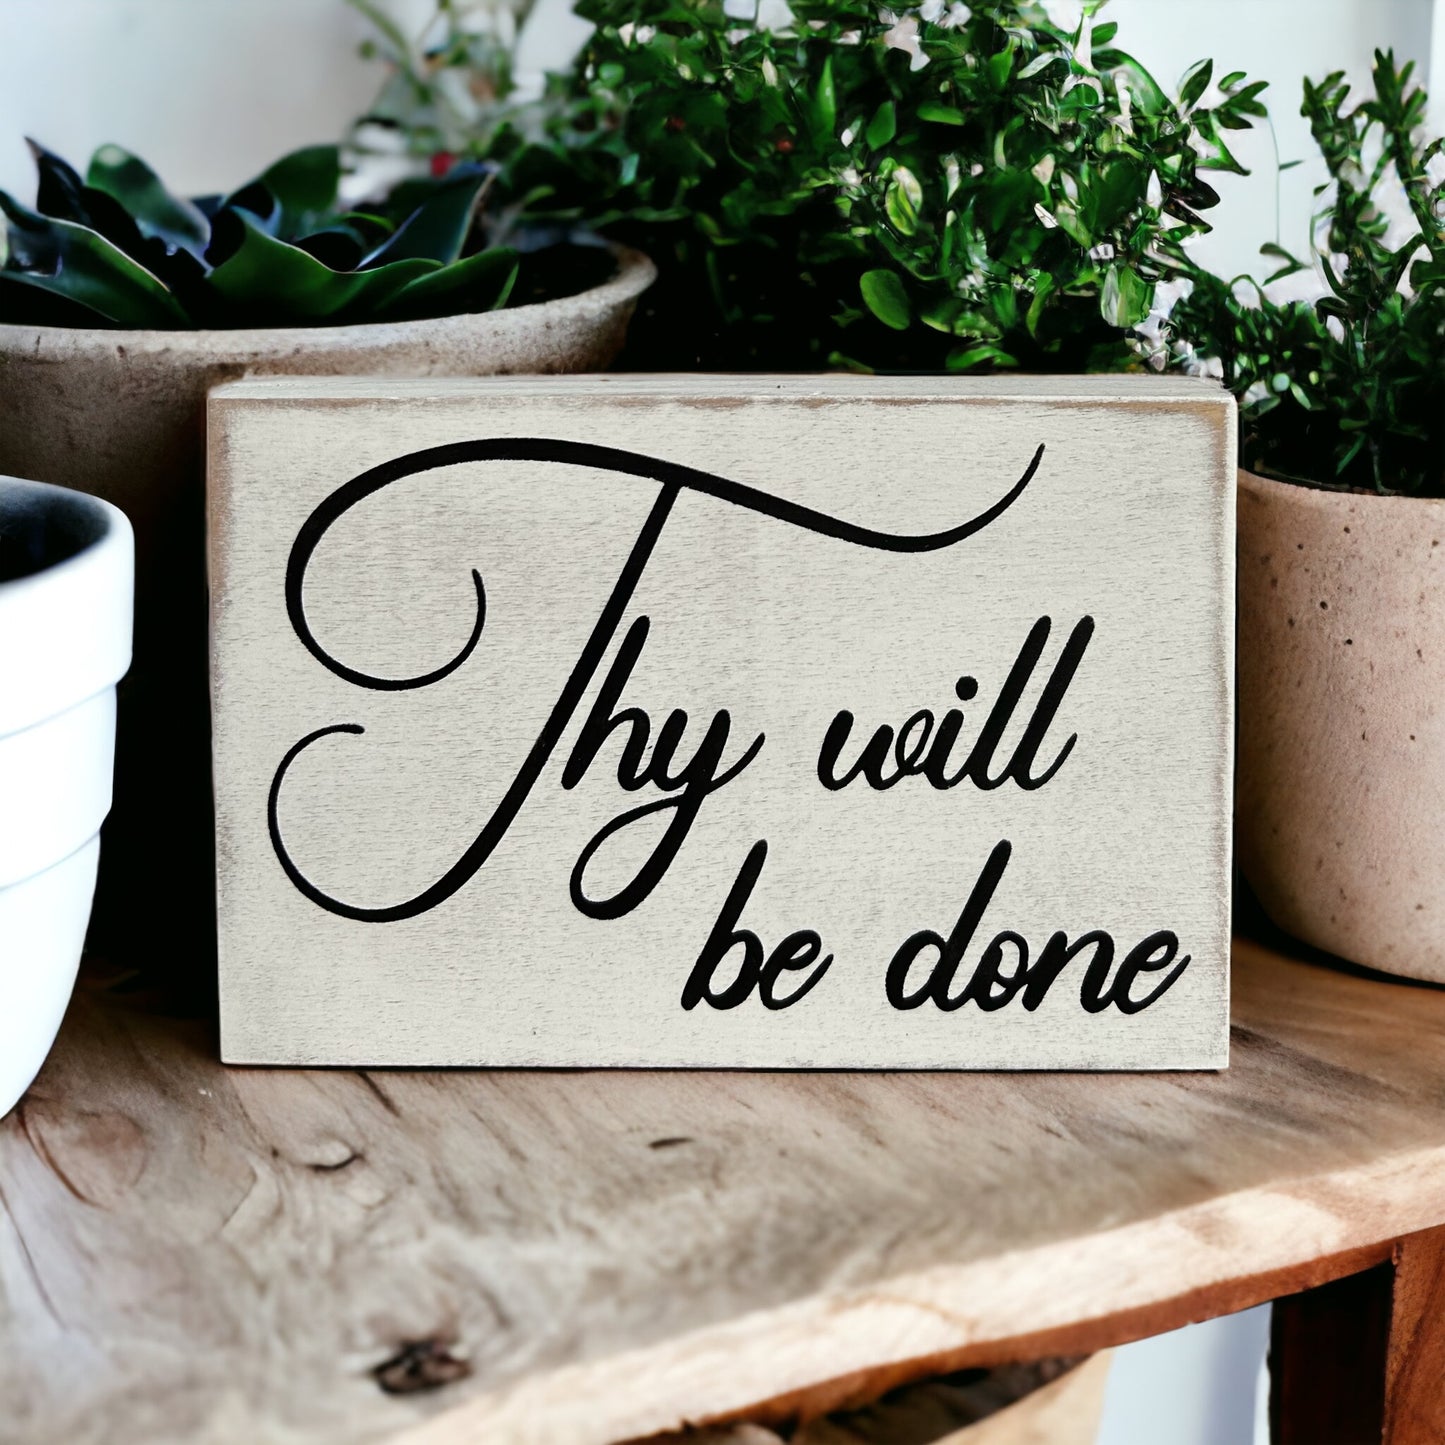 "thy will be done" wood sign